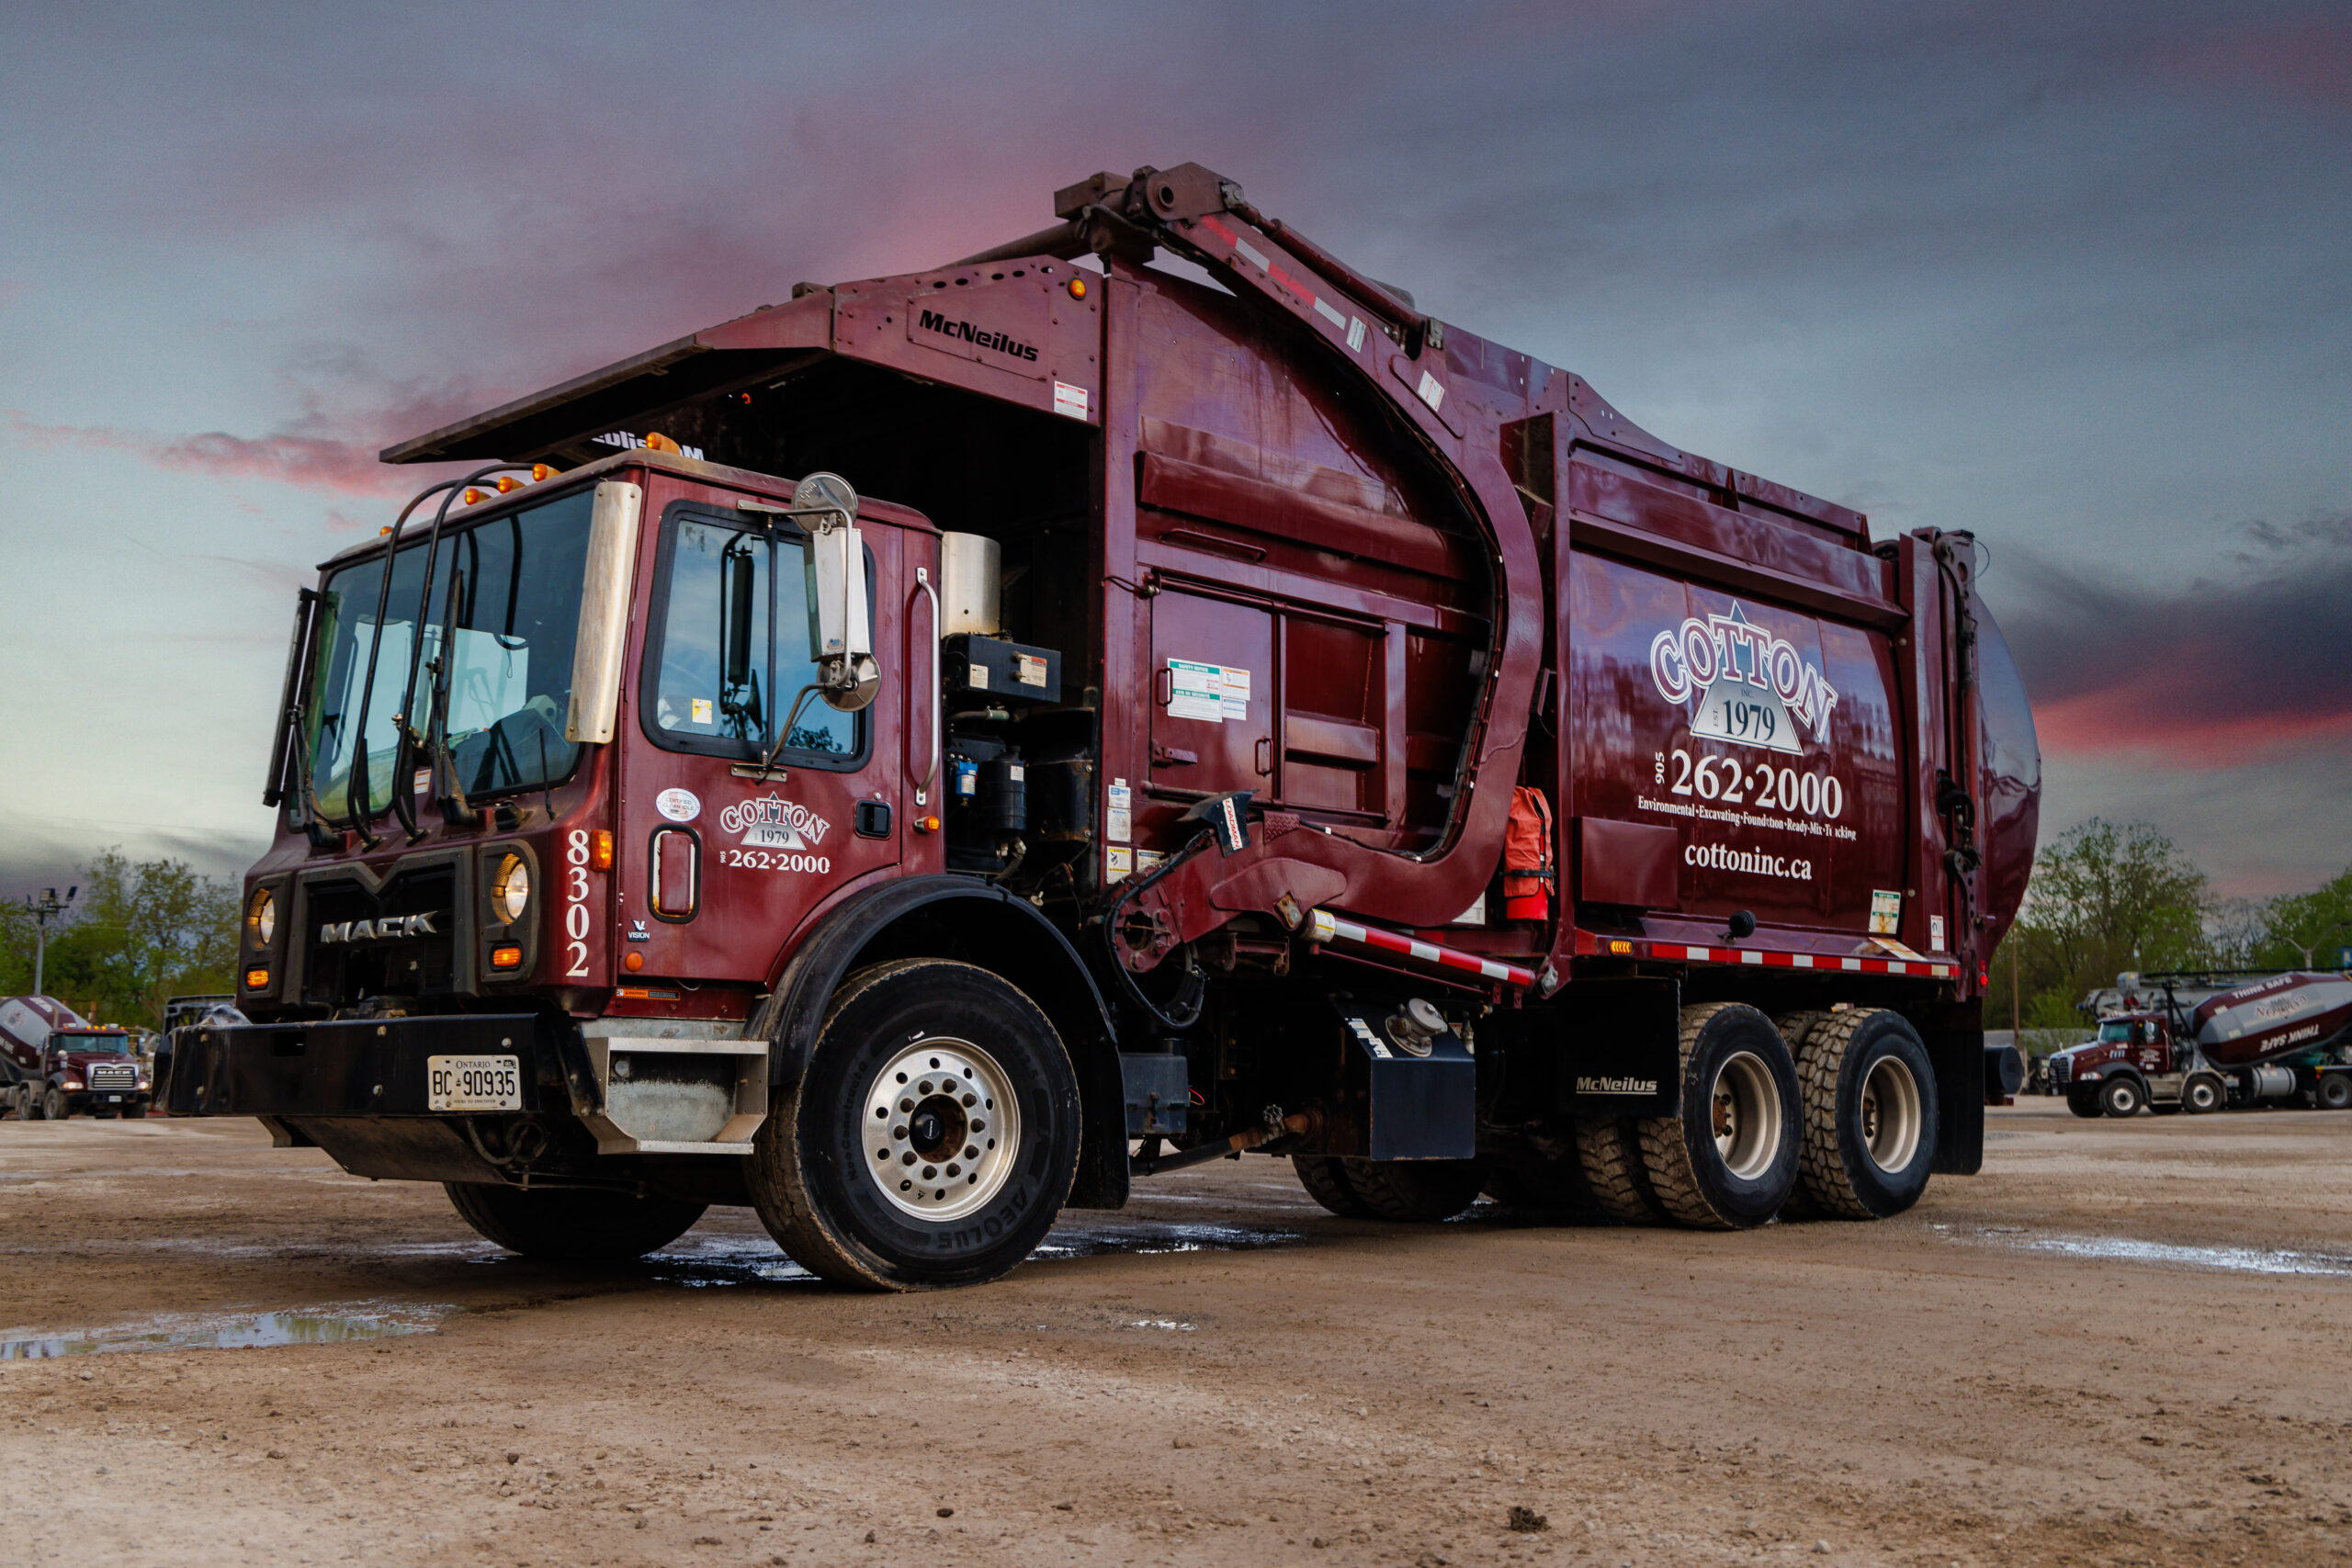 This photo shows a maroon garbage truck with a Cotton Inc logo.